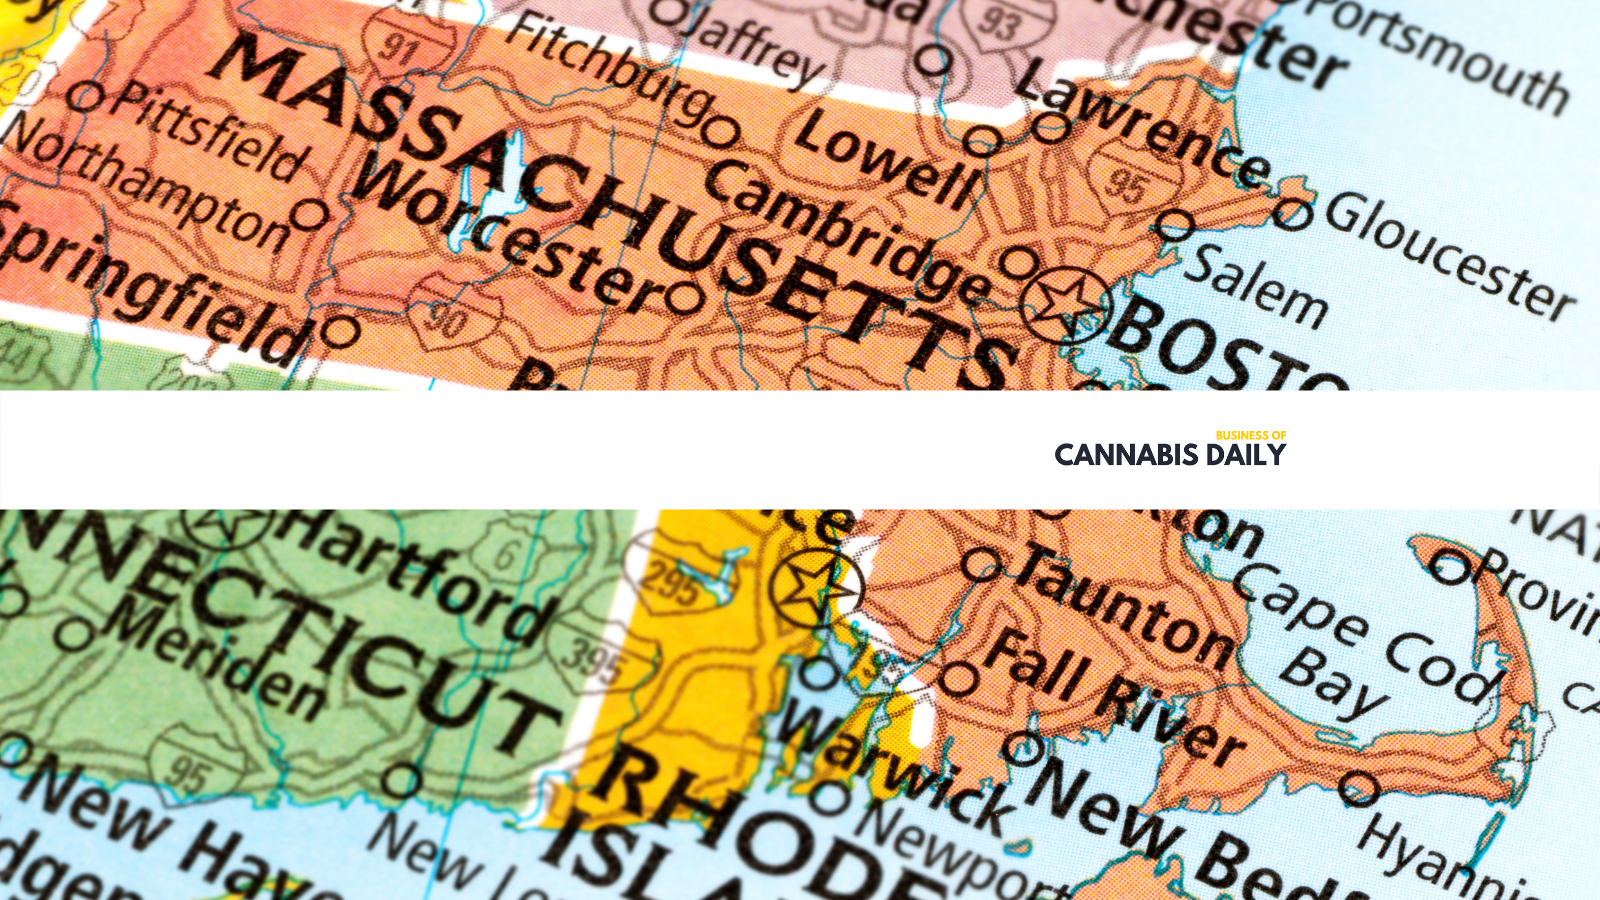 cannabis industry regulations are changing in massachusetts